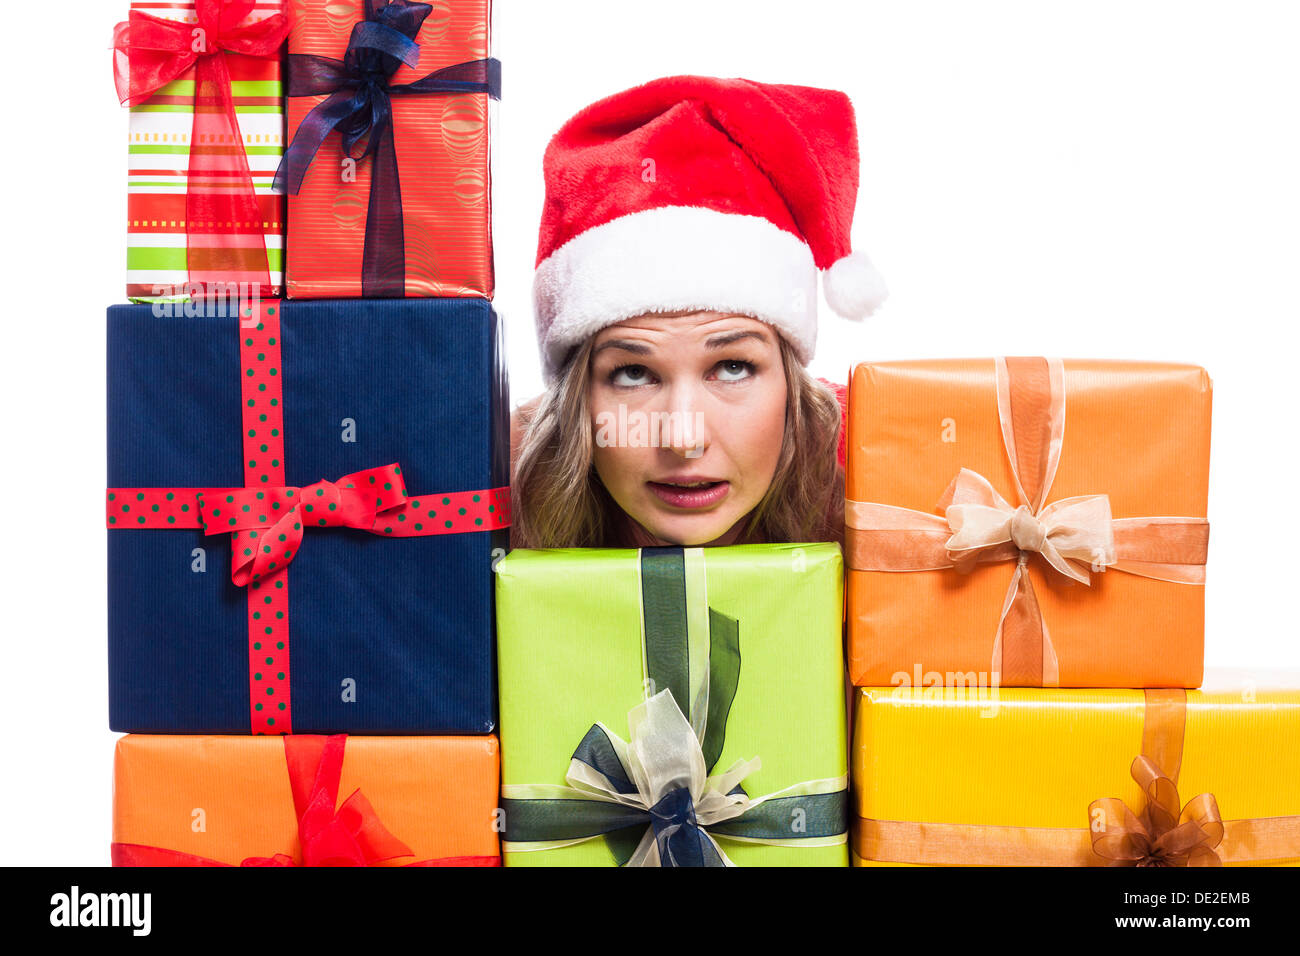 Christmas woman with many presents looking up, isolated on white background. Stock Photo